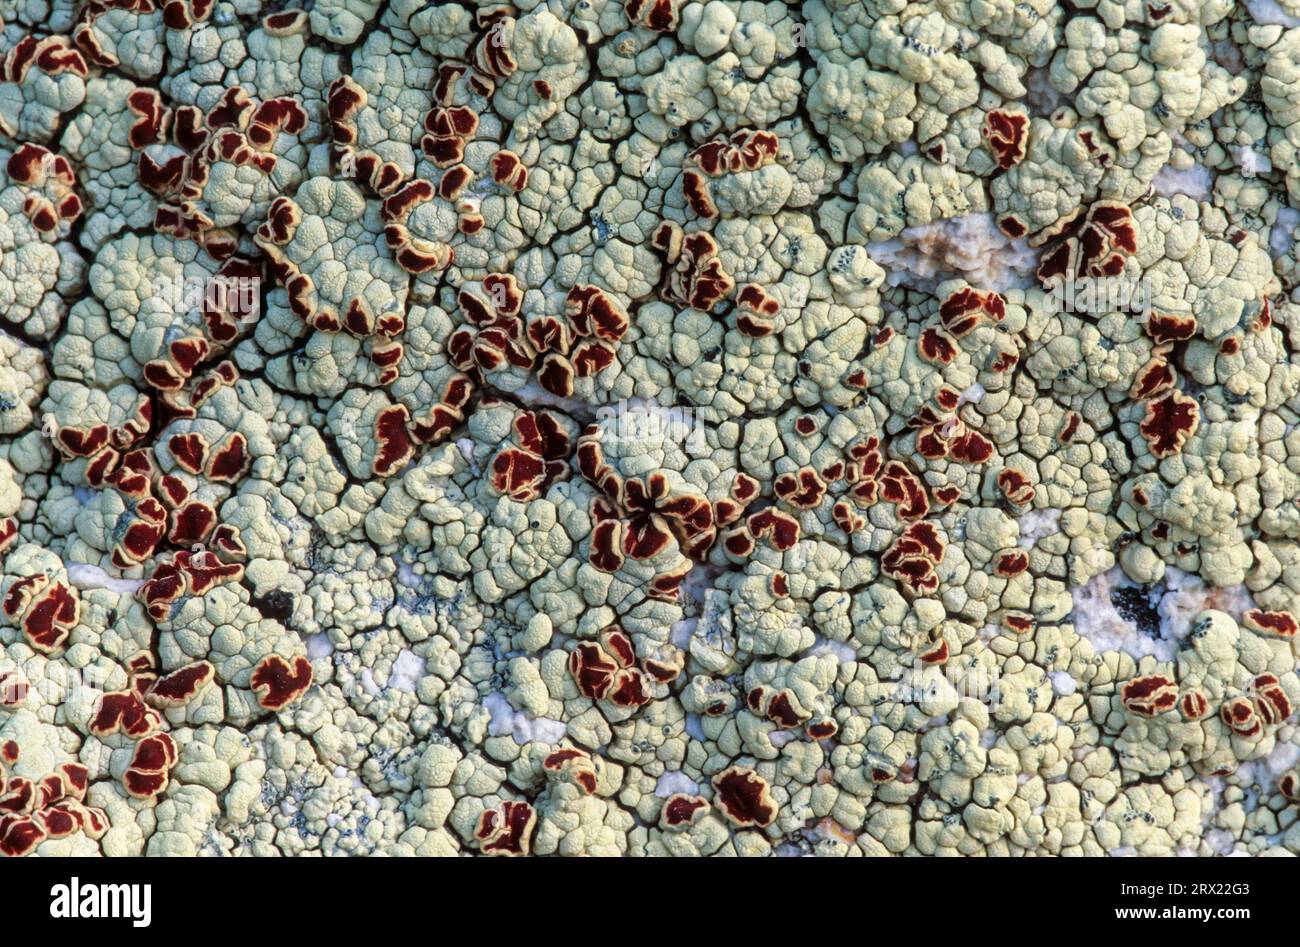 Crustose lichen forms conspicuous red fruiting bodies, the so-called apothecia, Alpine Bloodspot (Ophioparma ventosa) the apothecia are conspicuous Stock Photo